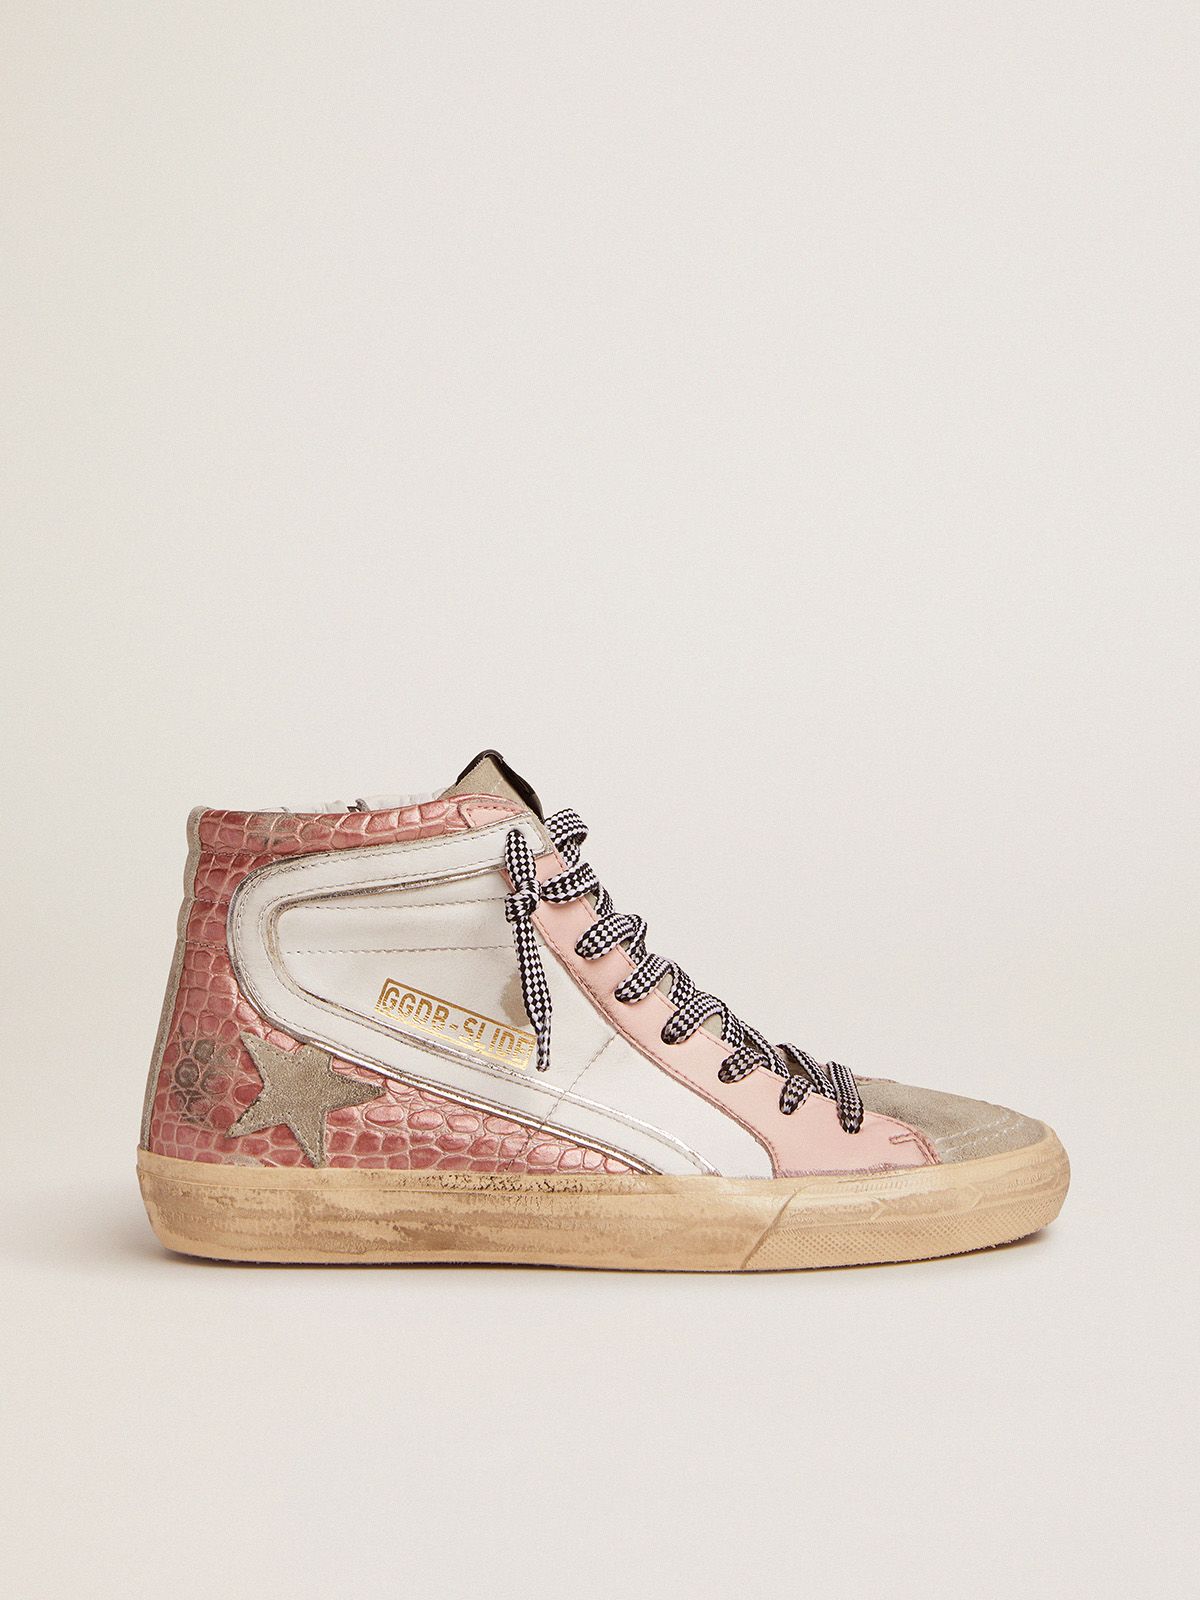 Golden Goose Bambina Slide sneakers with white leather and pink crocodile-print leather upper